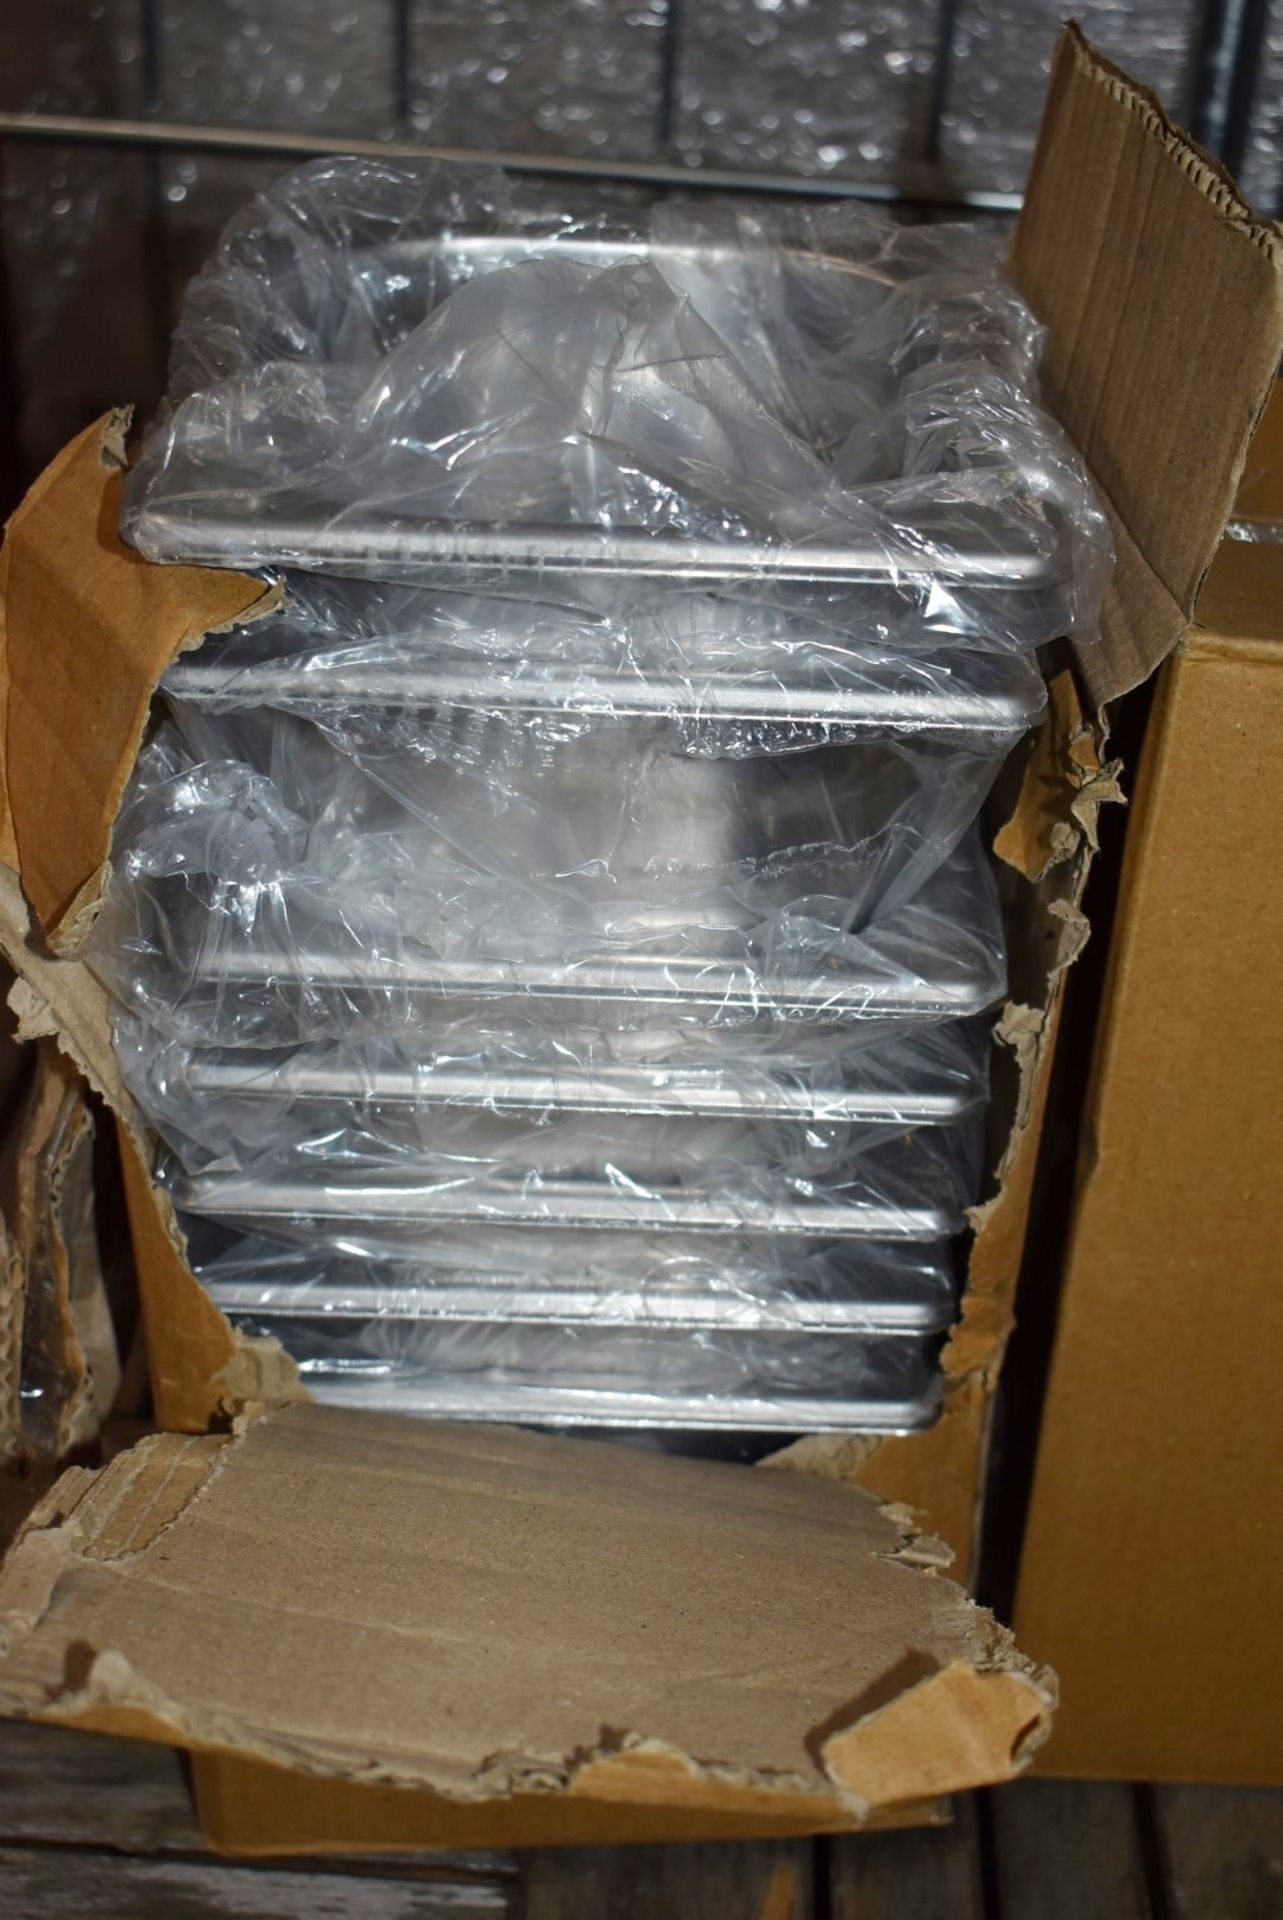 43 x Stainless Steel Gastro Pans - New in Boxes - 1/6 GN PAN, 150mm, 0.7mm - CL011 - Ref: GCA - Image 3 of 8